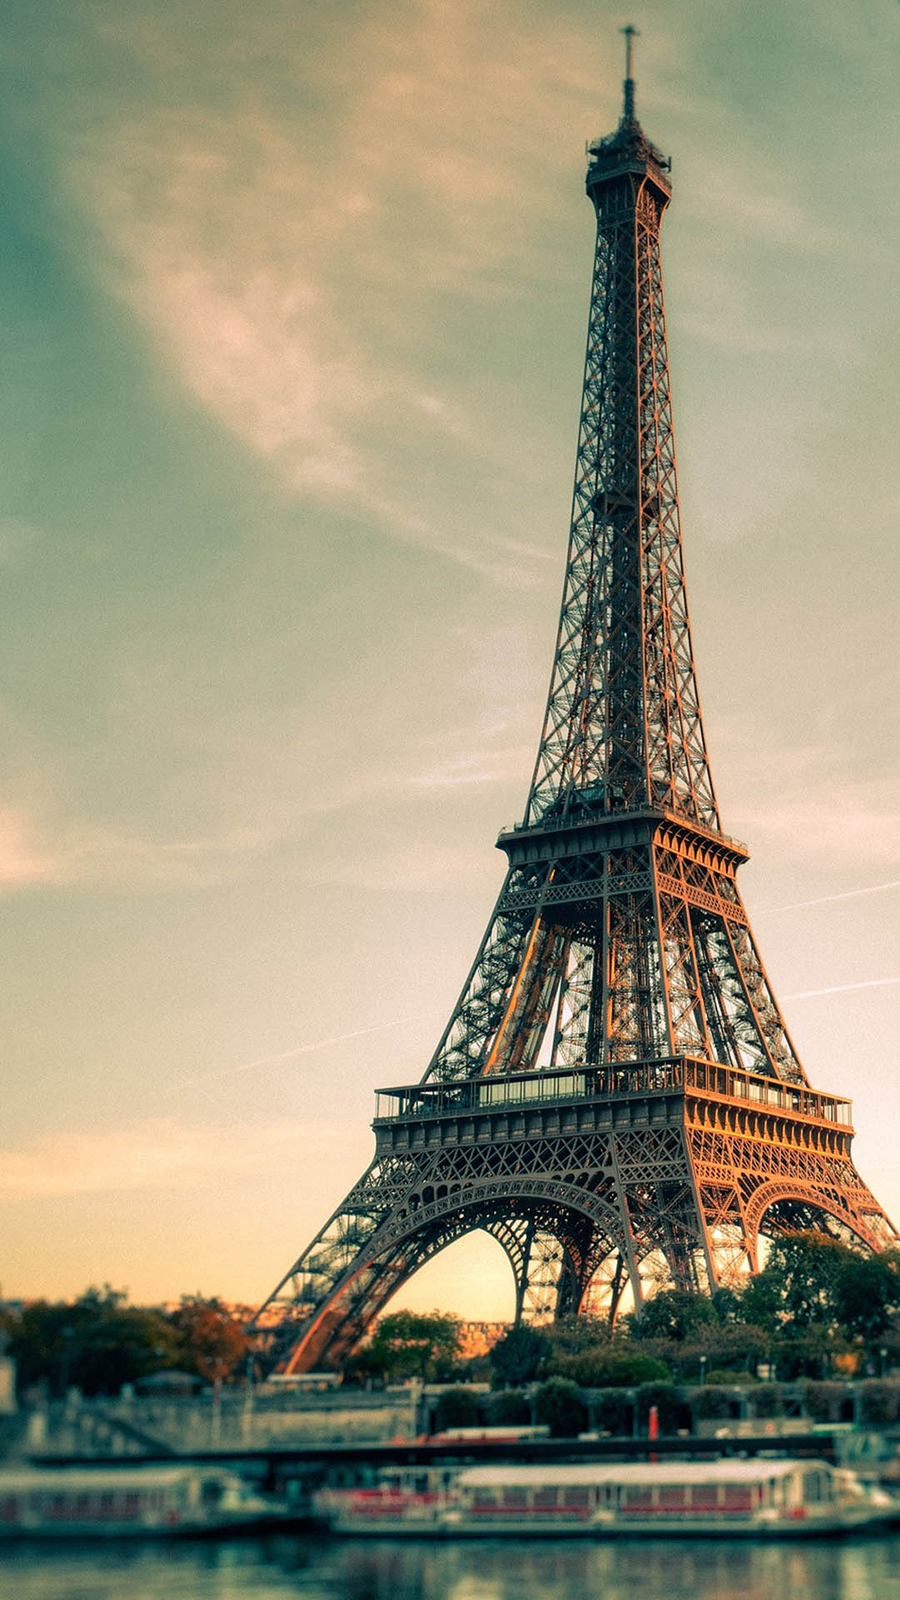 Eiffel Tower Photos, Download The BEST Free Eiffel Tower Stock